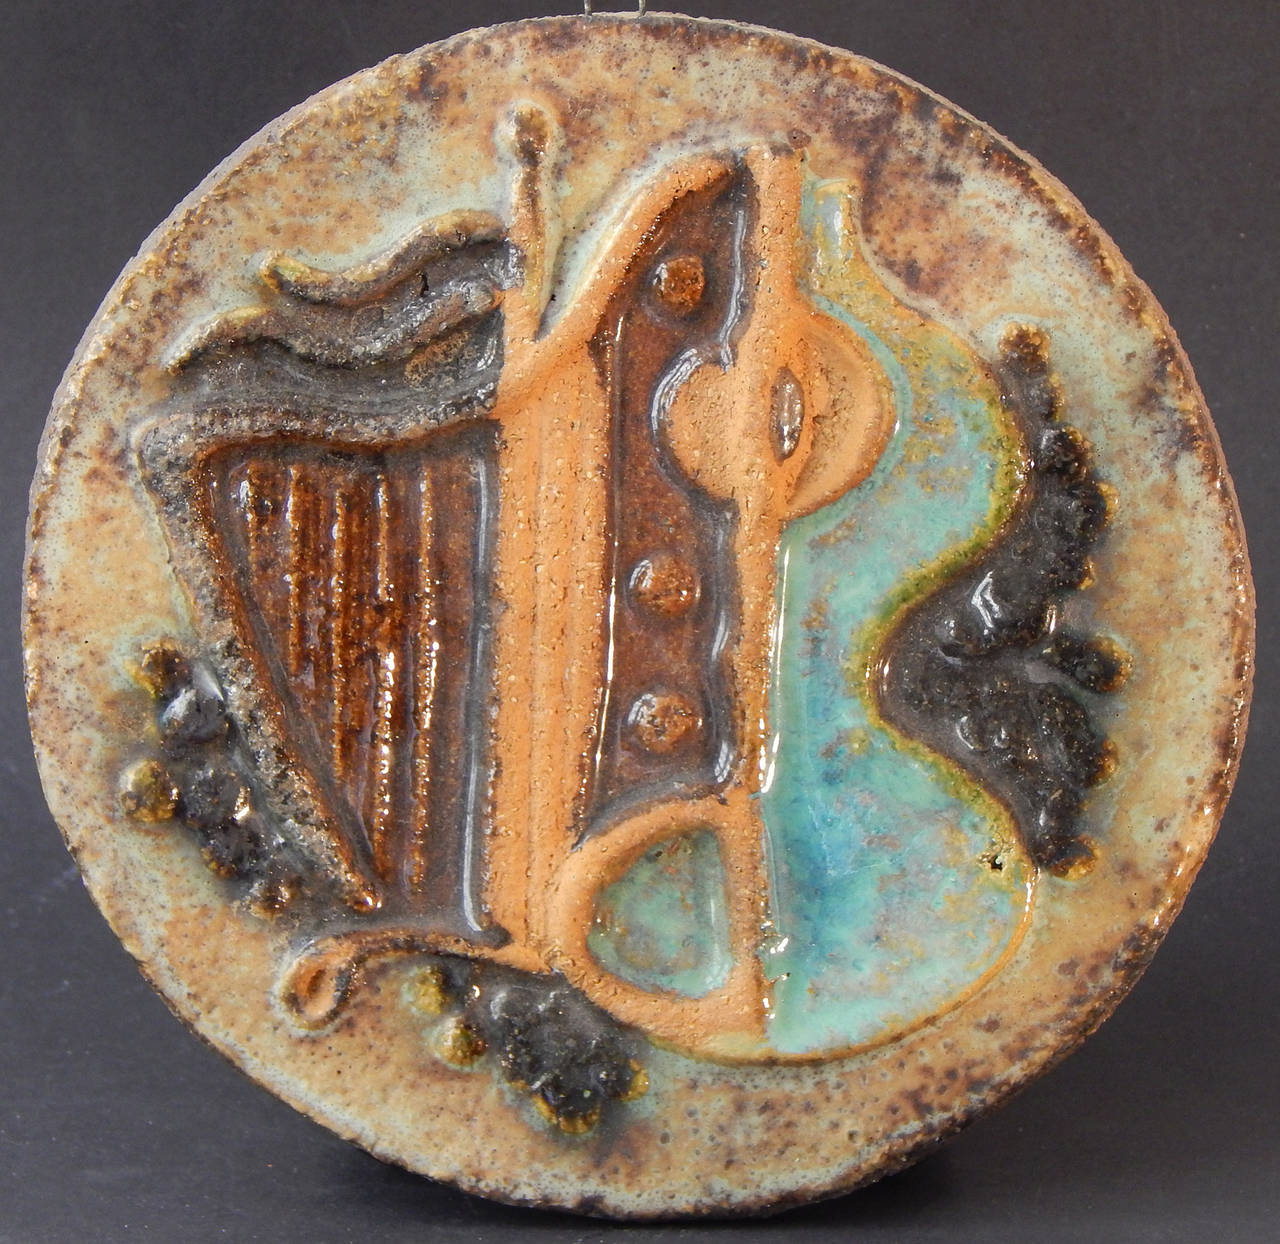 Superb in conception and execution, this pair of terra cotta plaques, depicting the pairing of a harp and guitar in the manner of Gris or Braque, is beautifully glazed in hues of turquoise, mossy green and rust.  Meant to be hung on a wall or placed